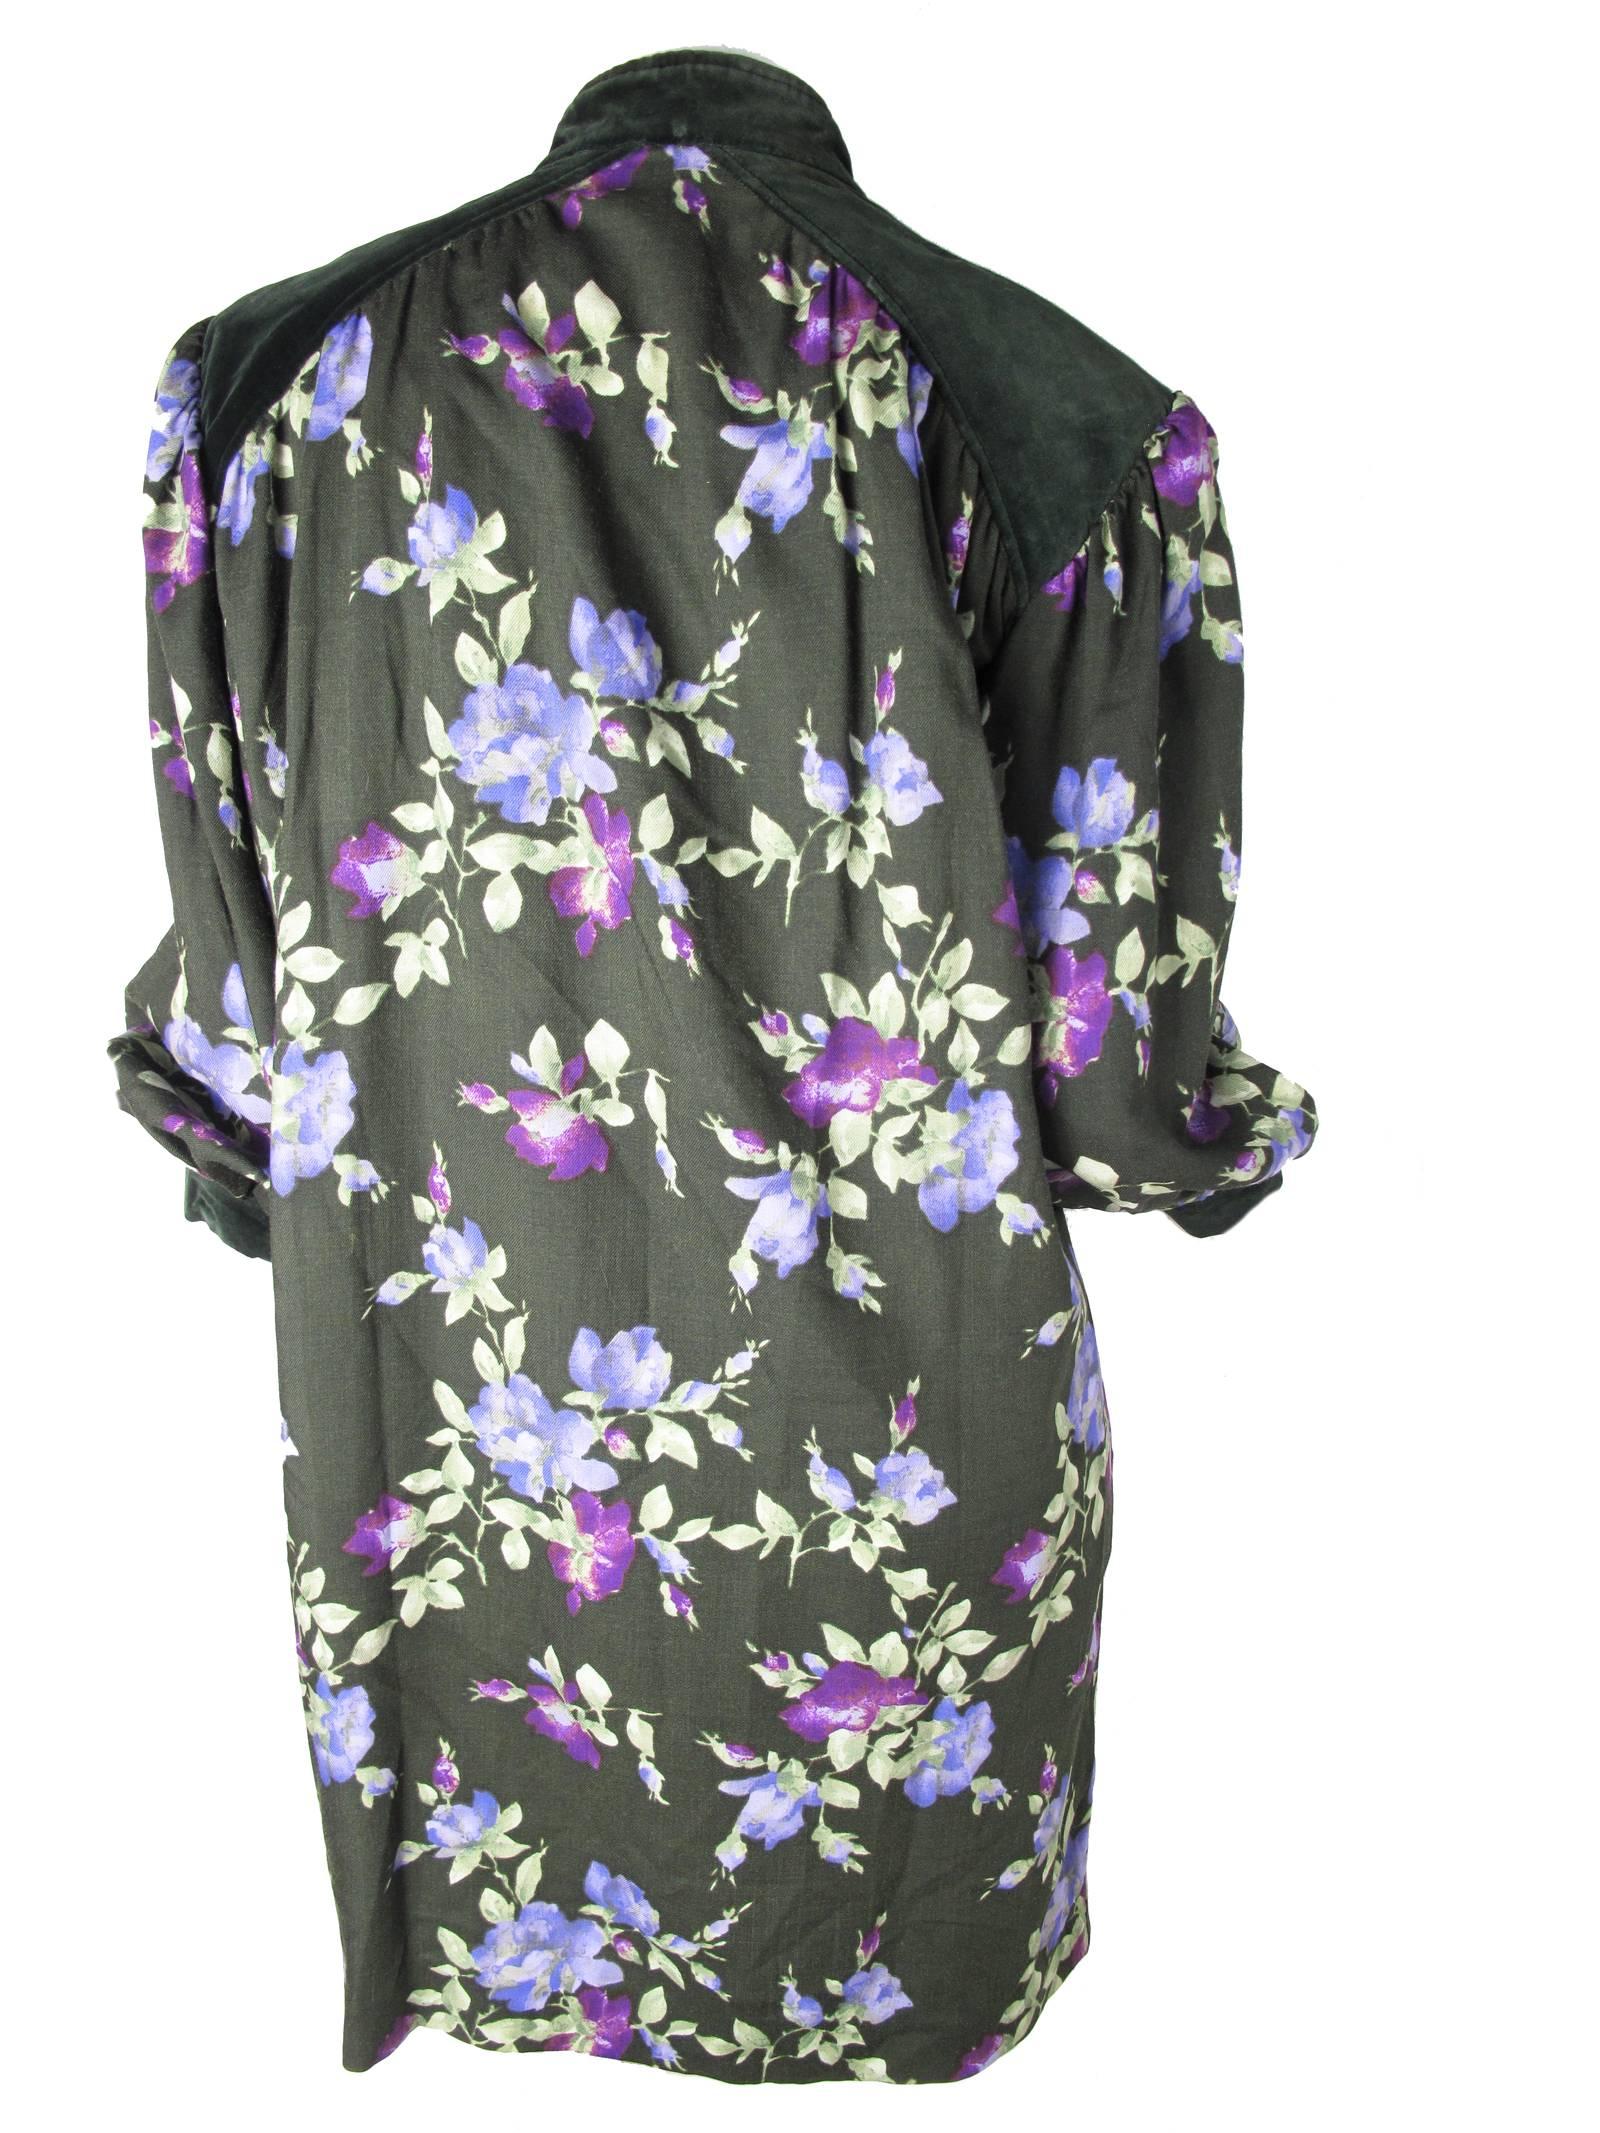 1980s Yves Saint Laurent Rive Gauche green and purple wool floral sack dress with velvet cuffs and neckline.  Zipper on front, two side pockets. Condition: As is, multiple moth holes on underneath side of right sleeve and some on front .  Size